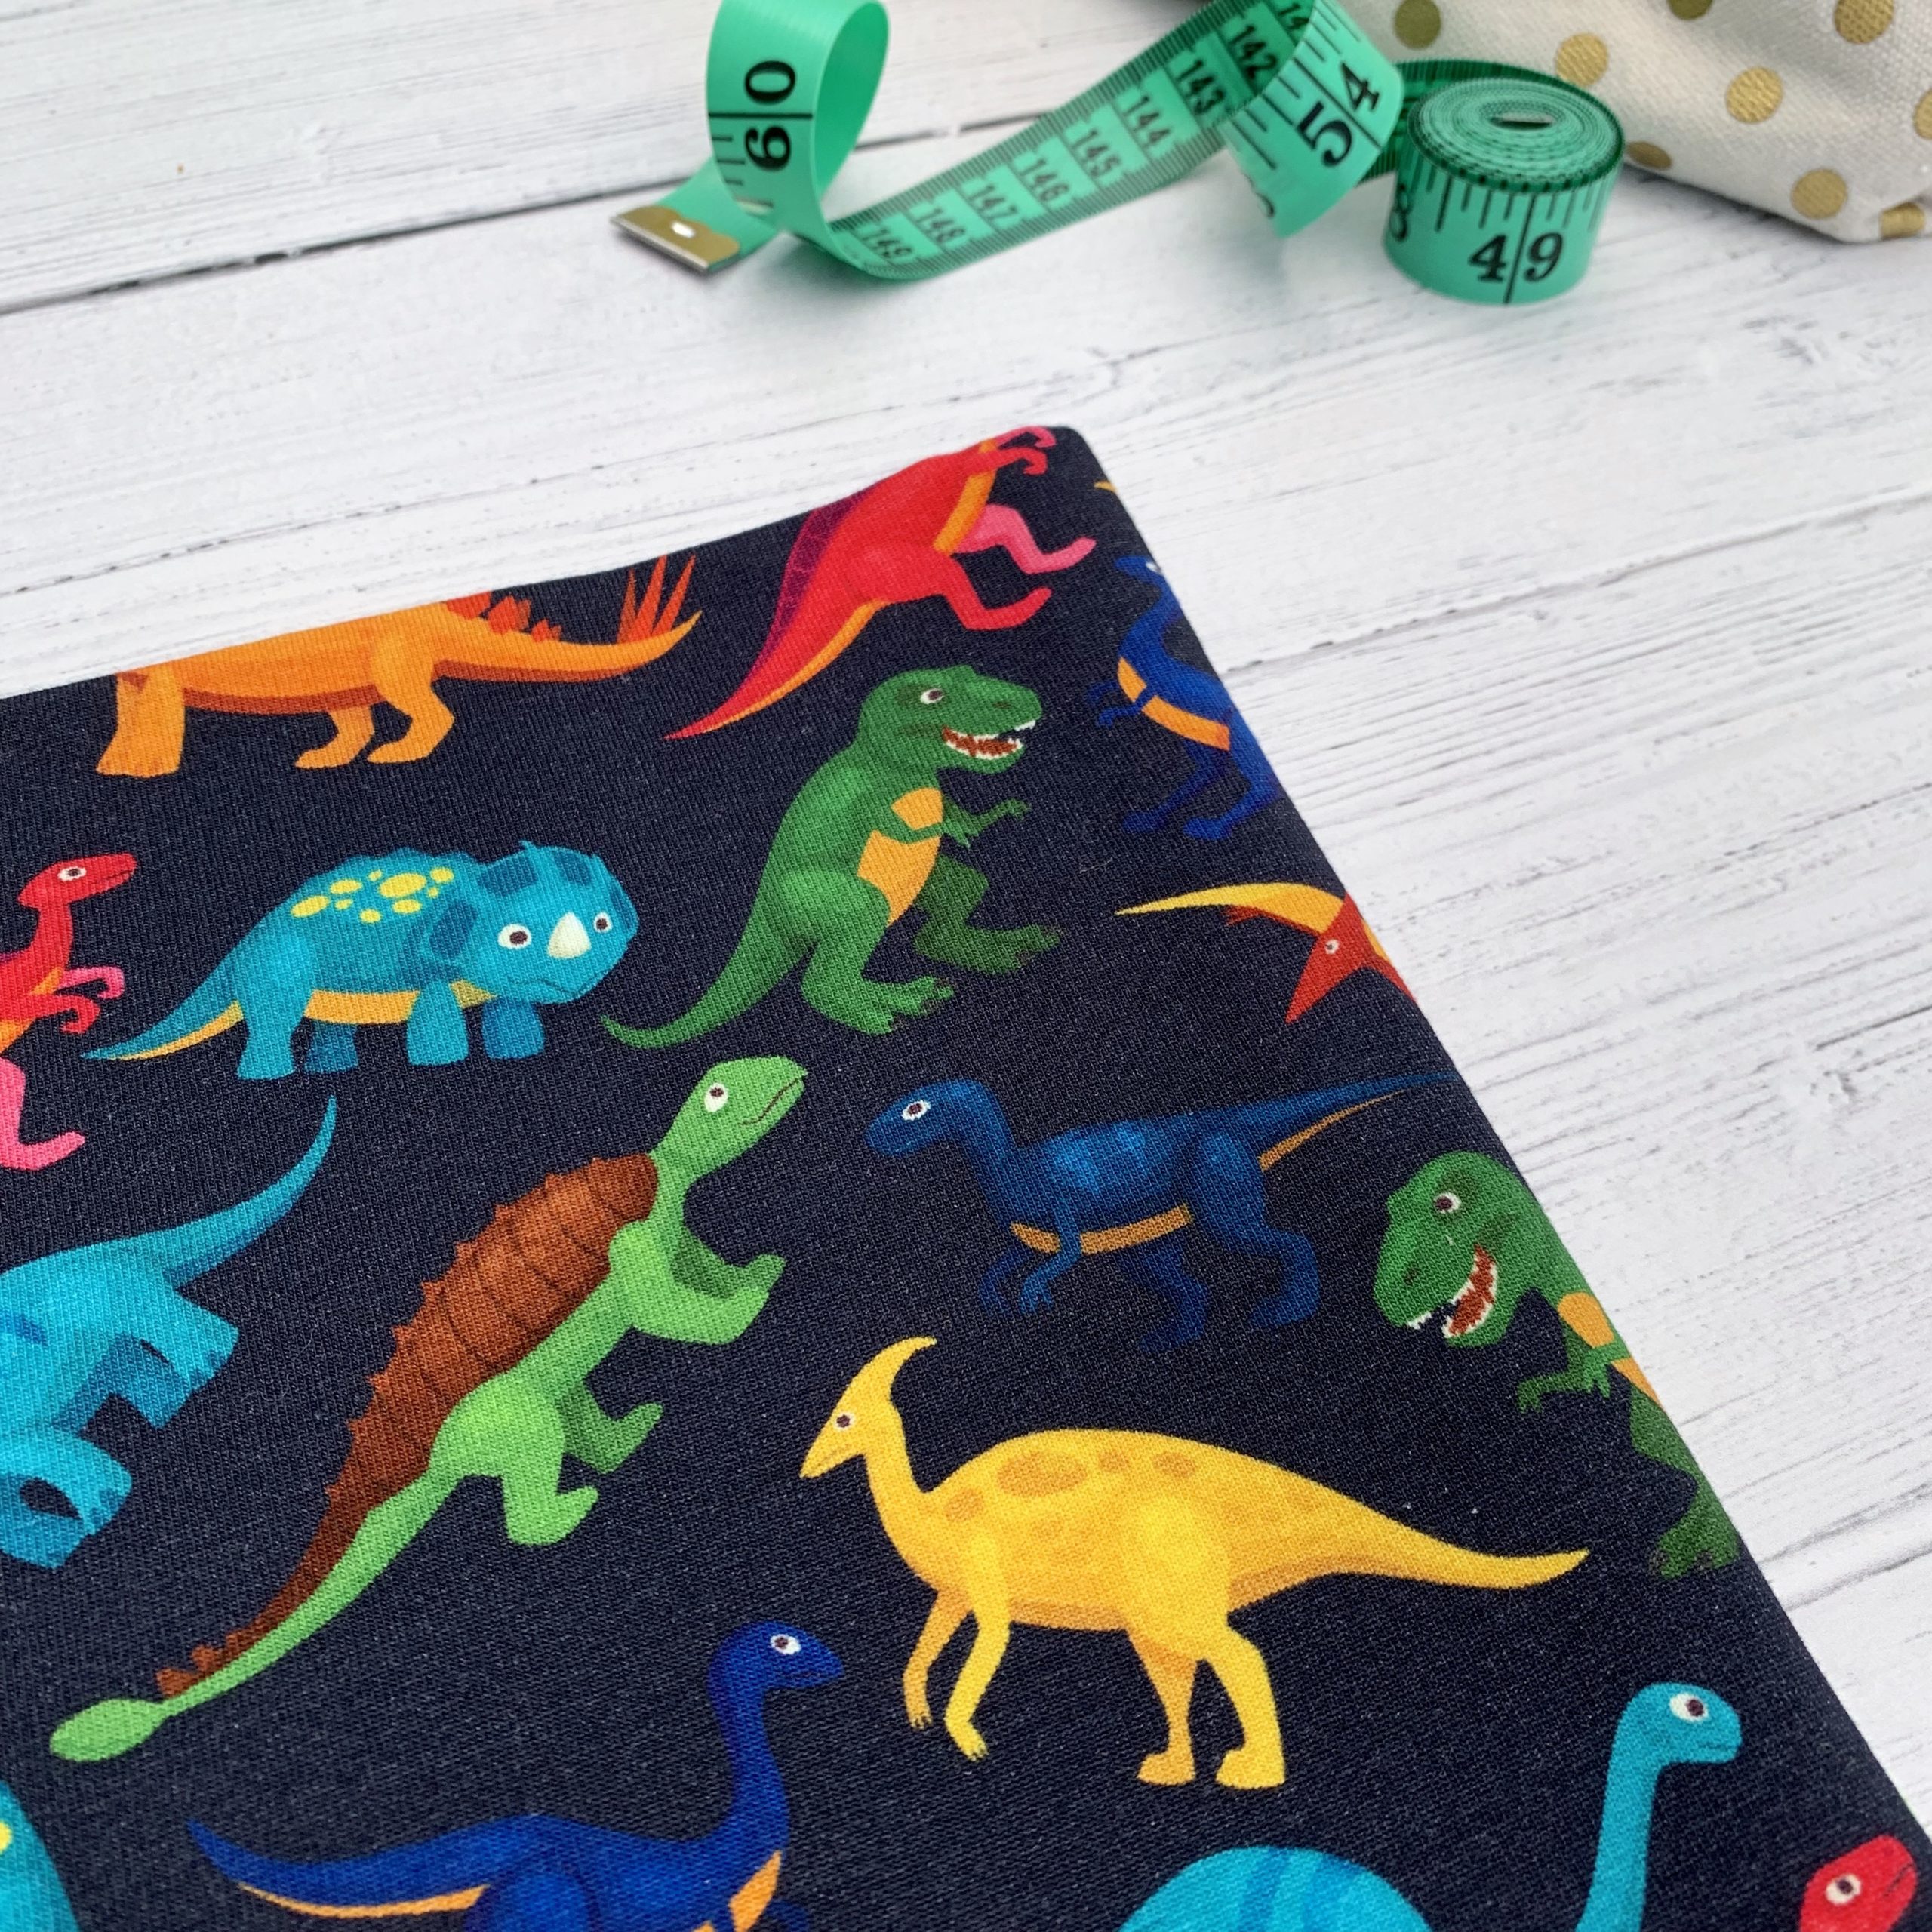 Jurrasic park dinosaurs French terry knit fabric cotton knitwear Jersey Fabric Realistic Dinosaurs sweatshirts fabric Dinosaurs Fabric.